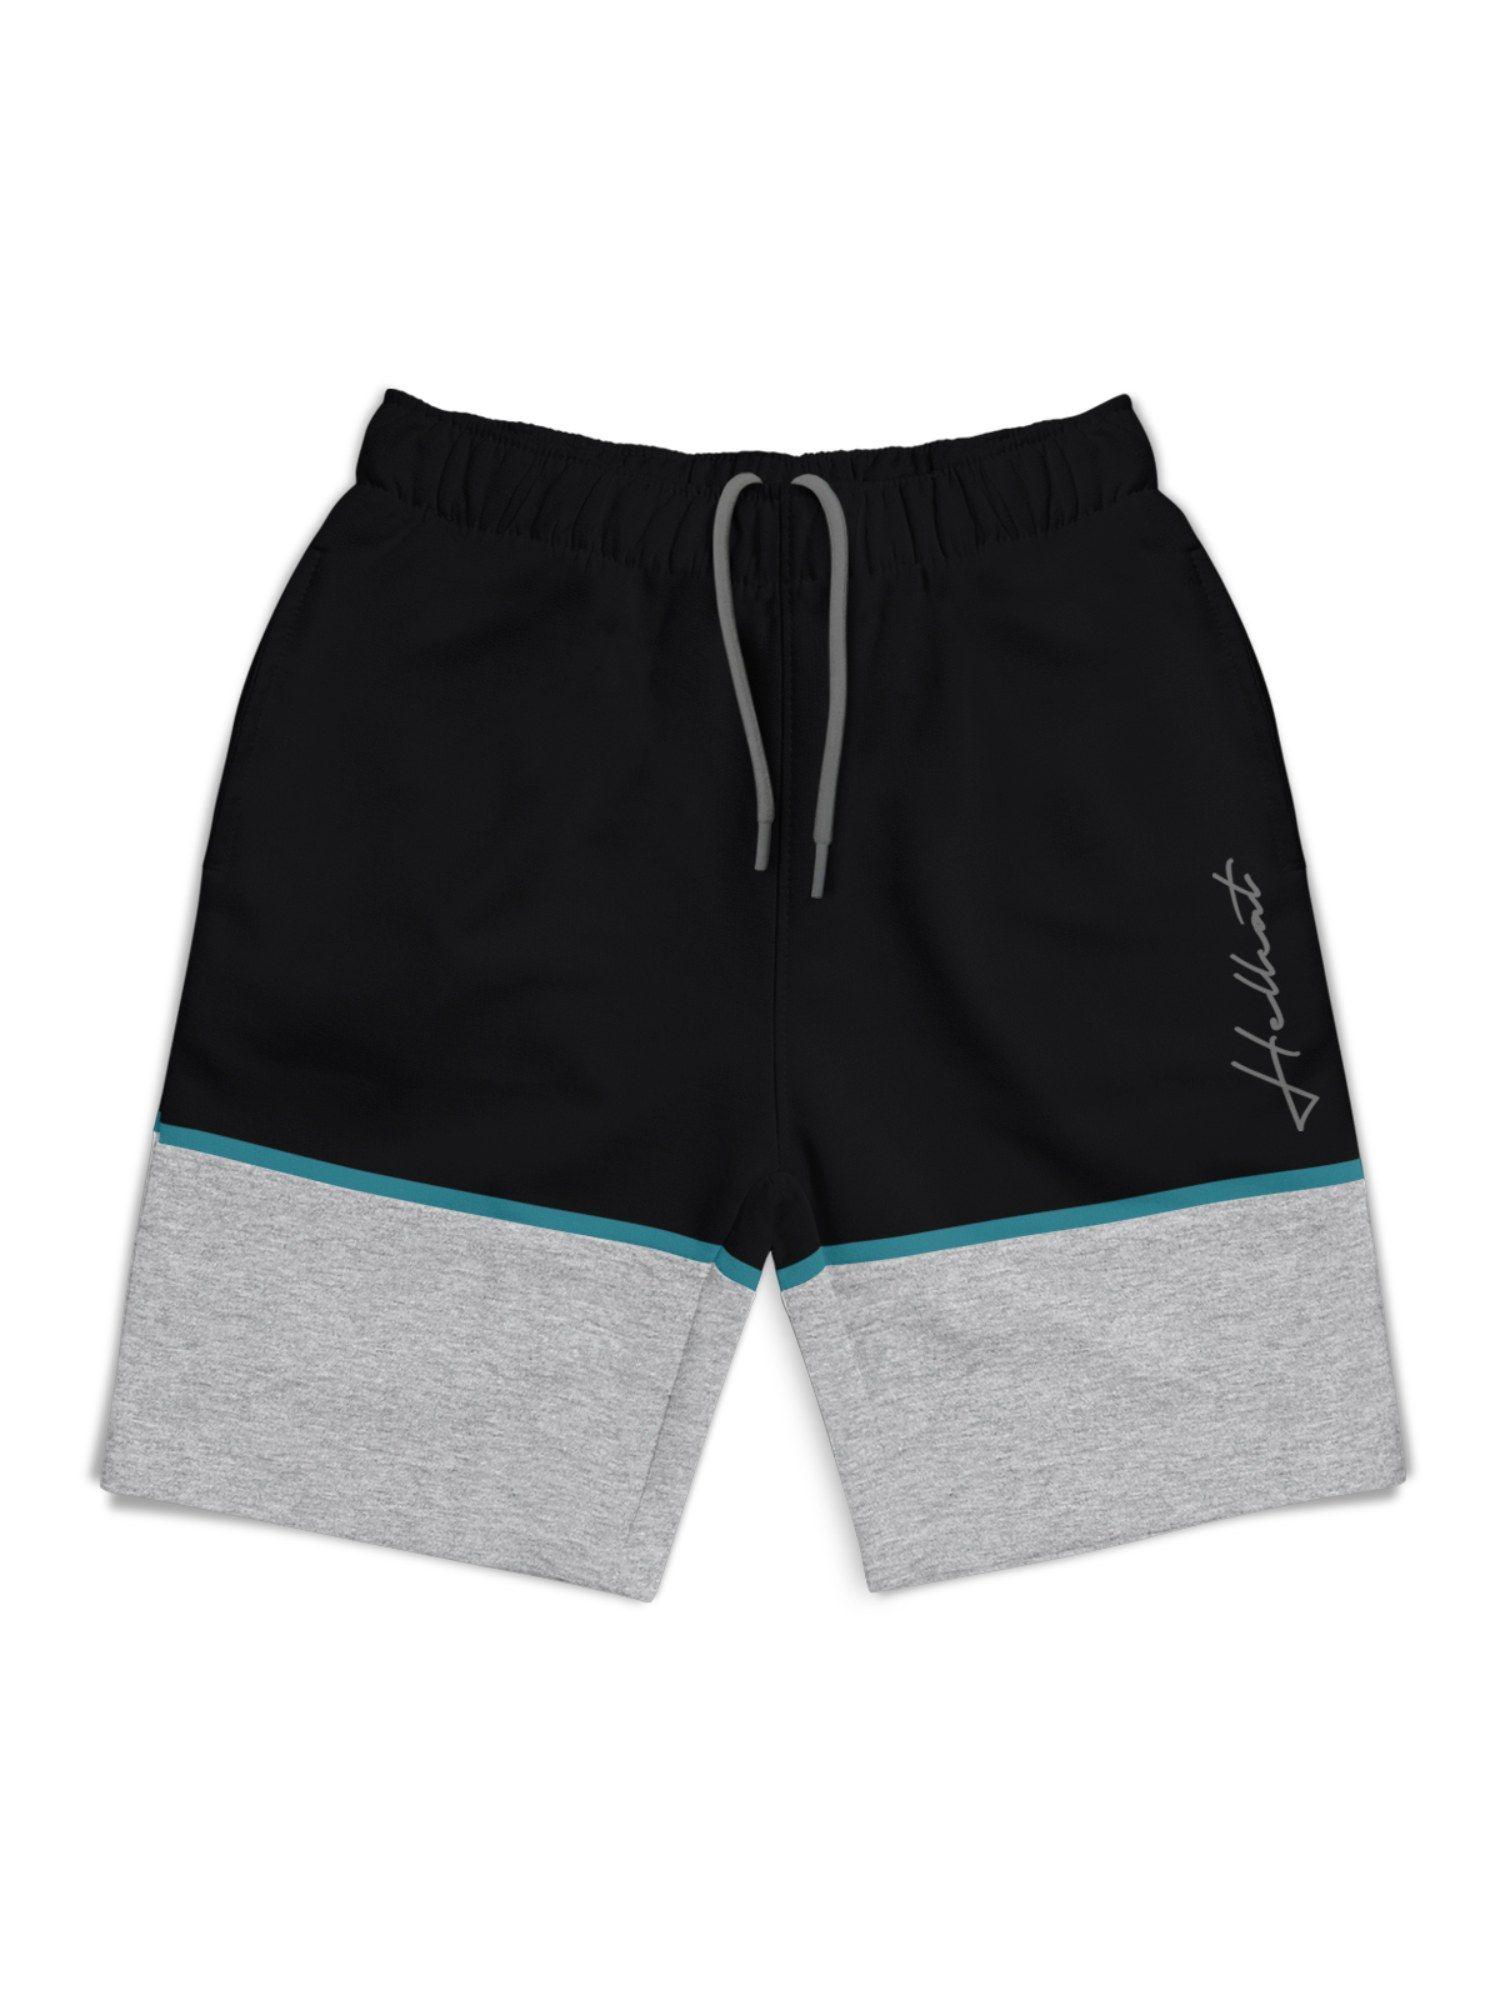 trendy-black-colorblock-with-branding-printed-shorts